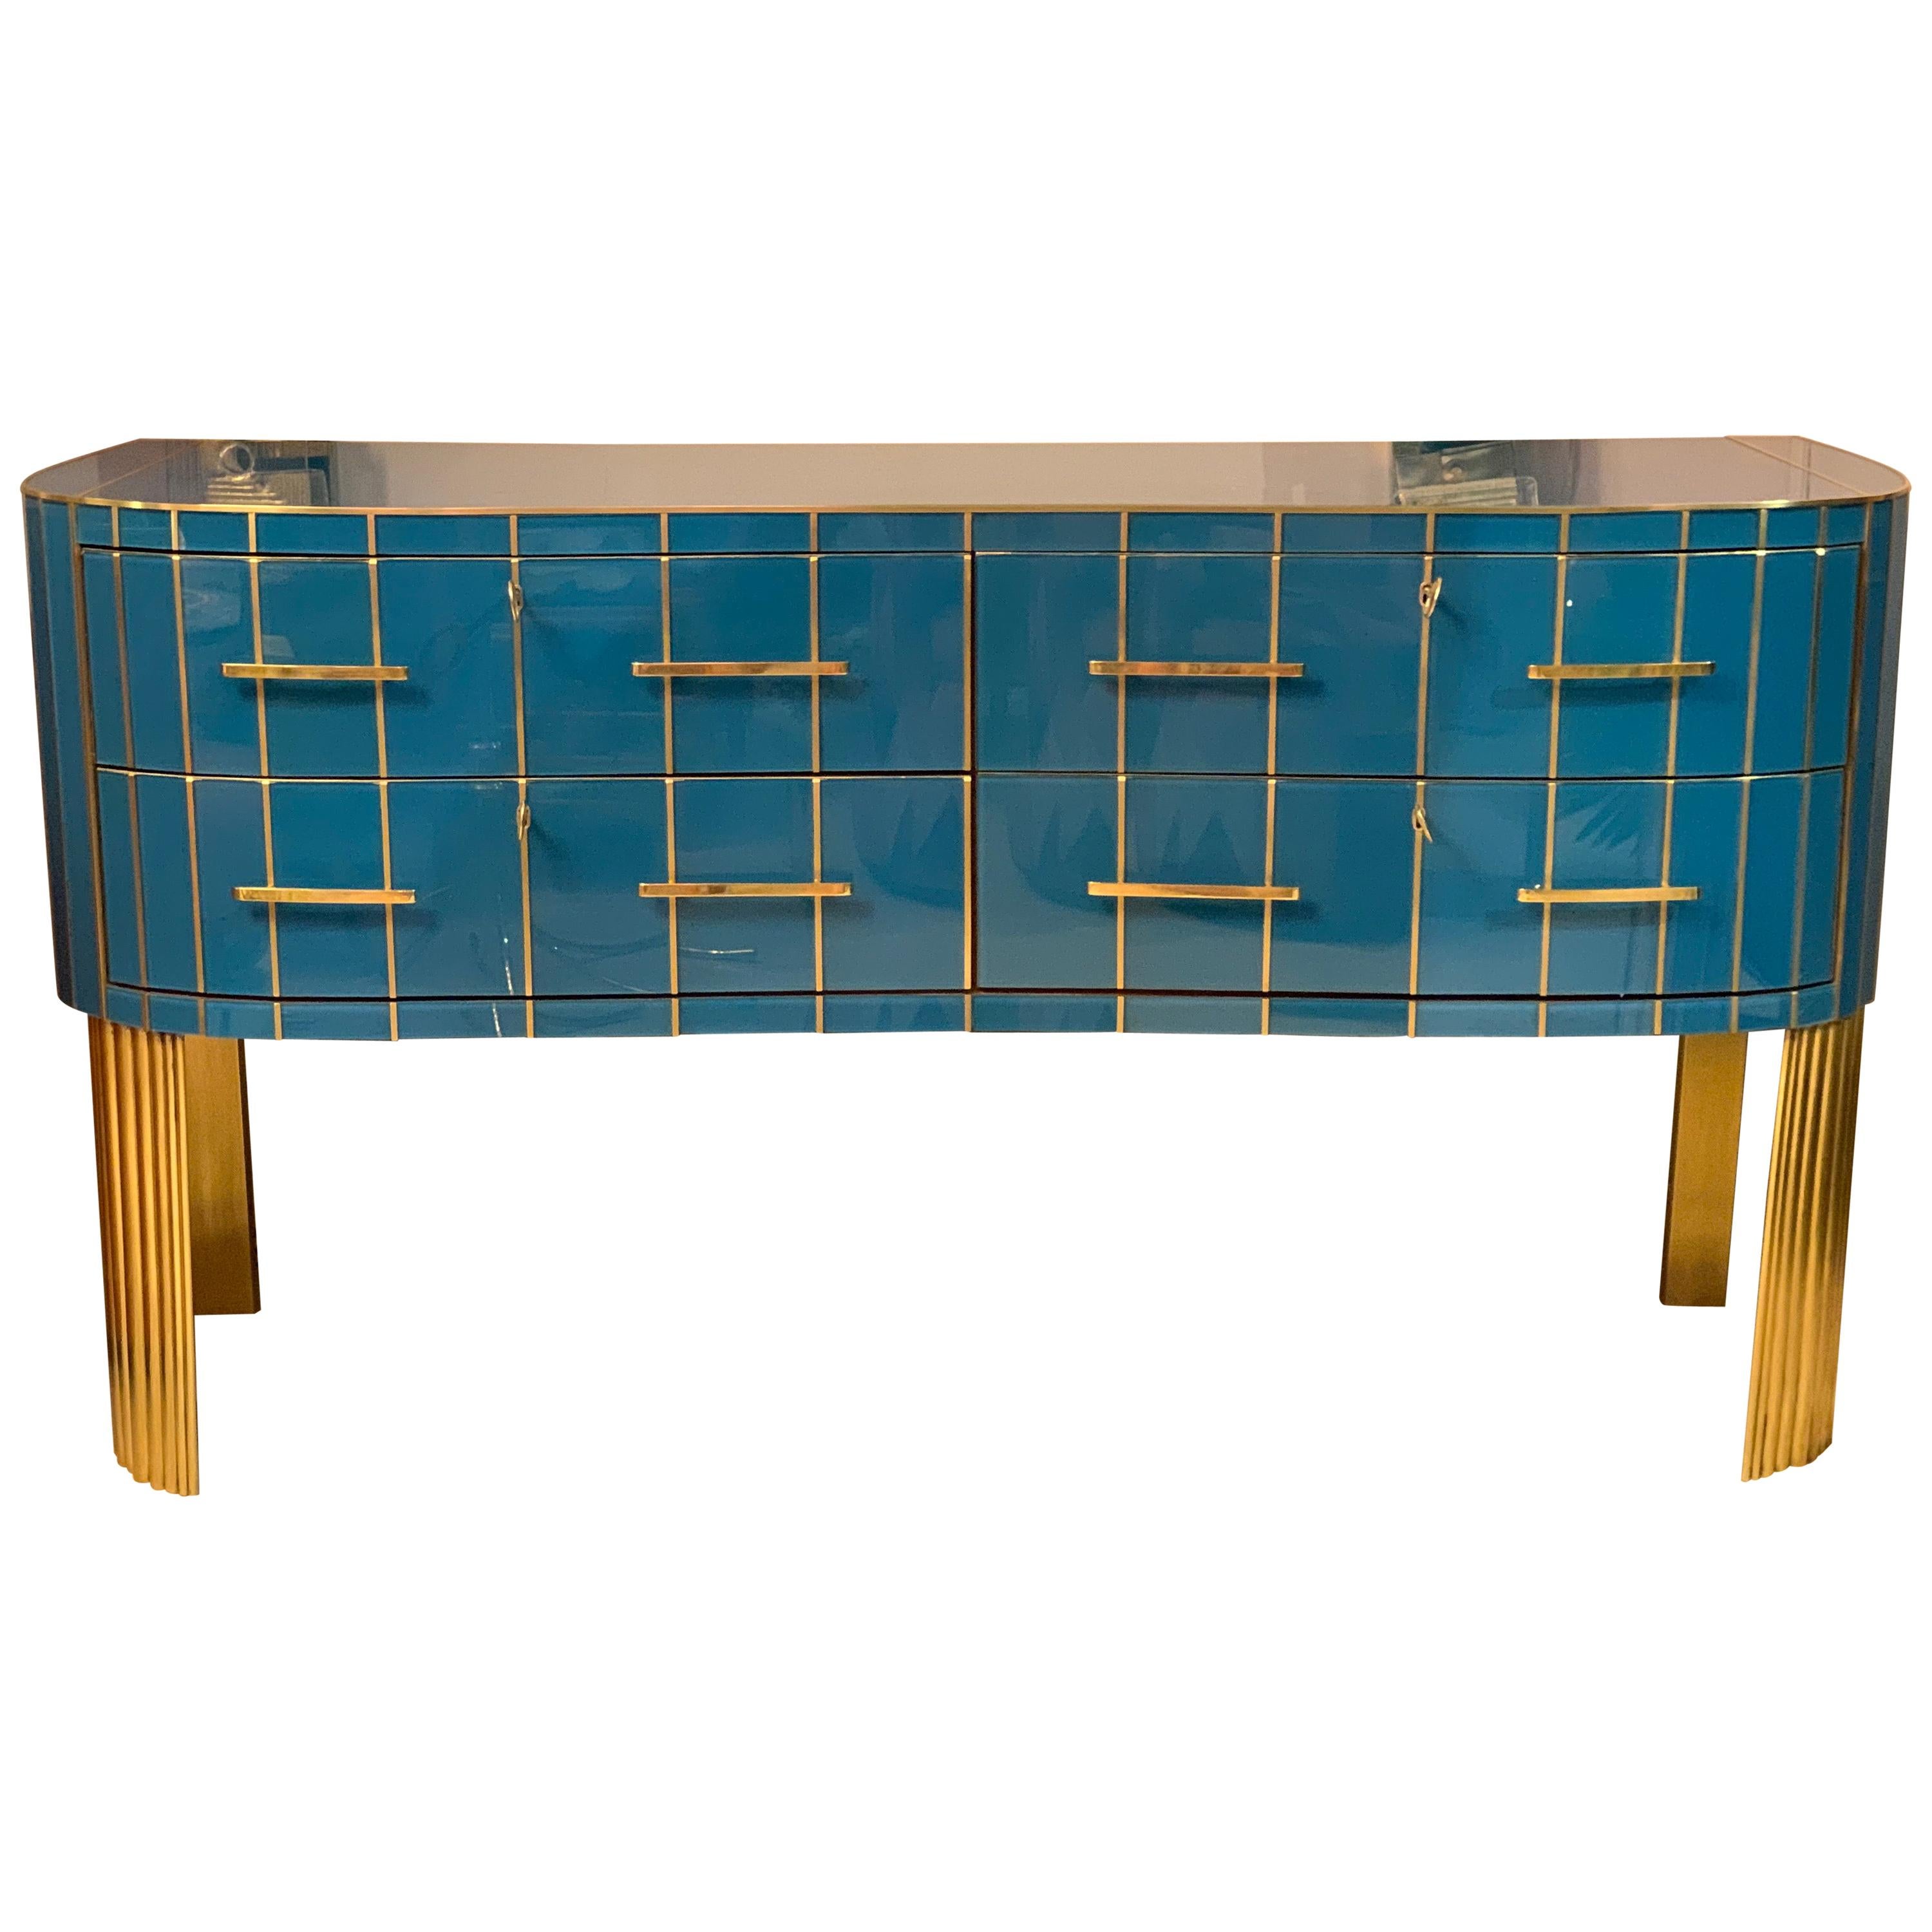 Italian turquoise opaline glass chest of drawers, brass handles, inlays and legs.
The chest has four drawers and the front is slightly rounded in the sense that it has a particular wavy front shape.